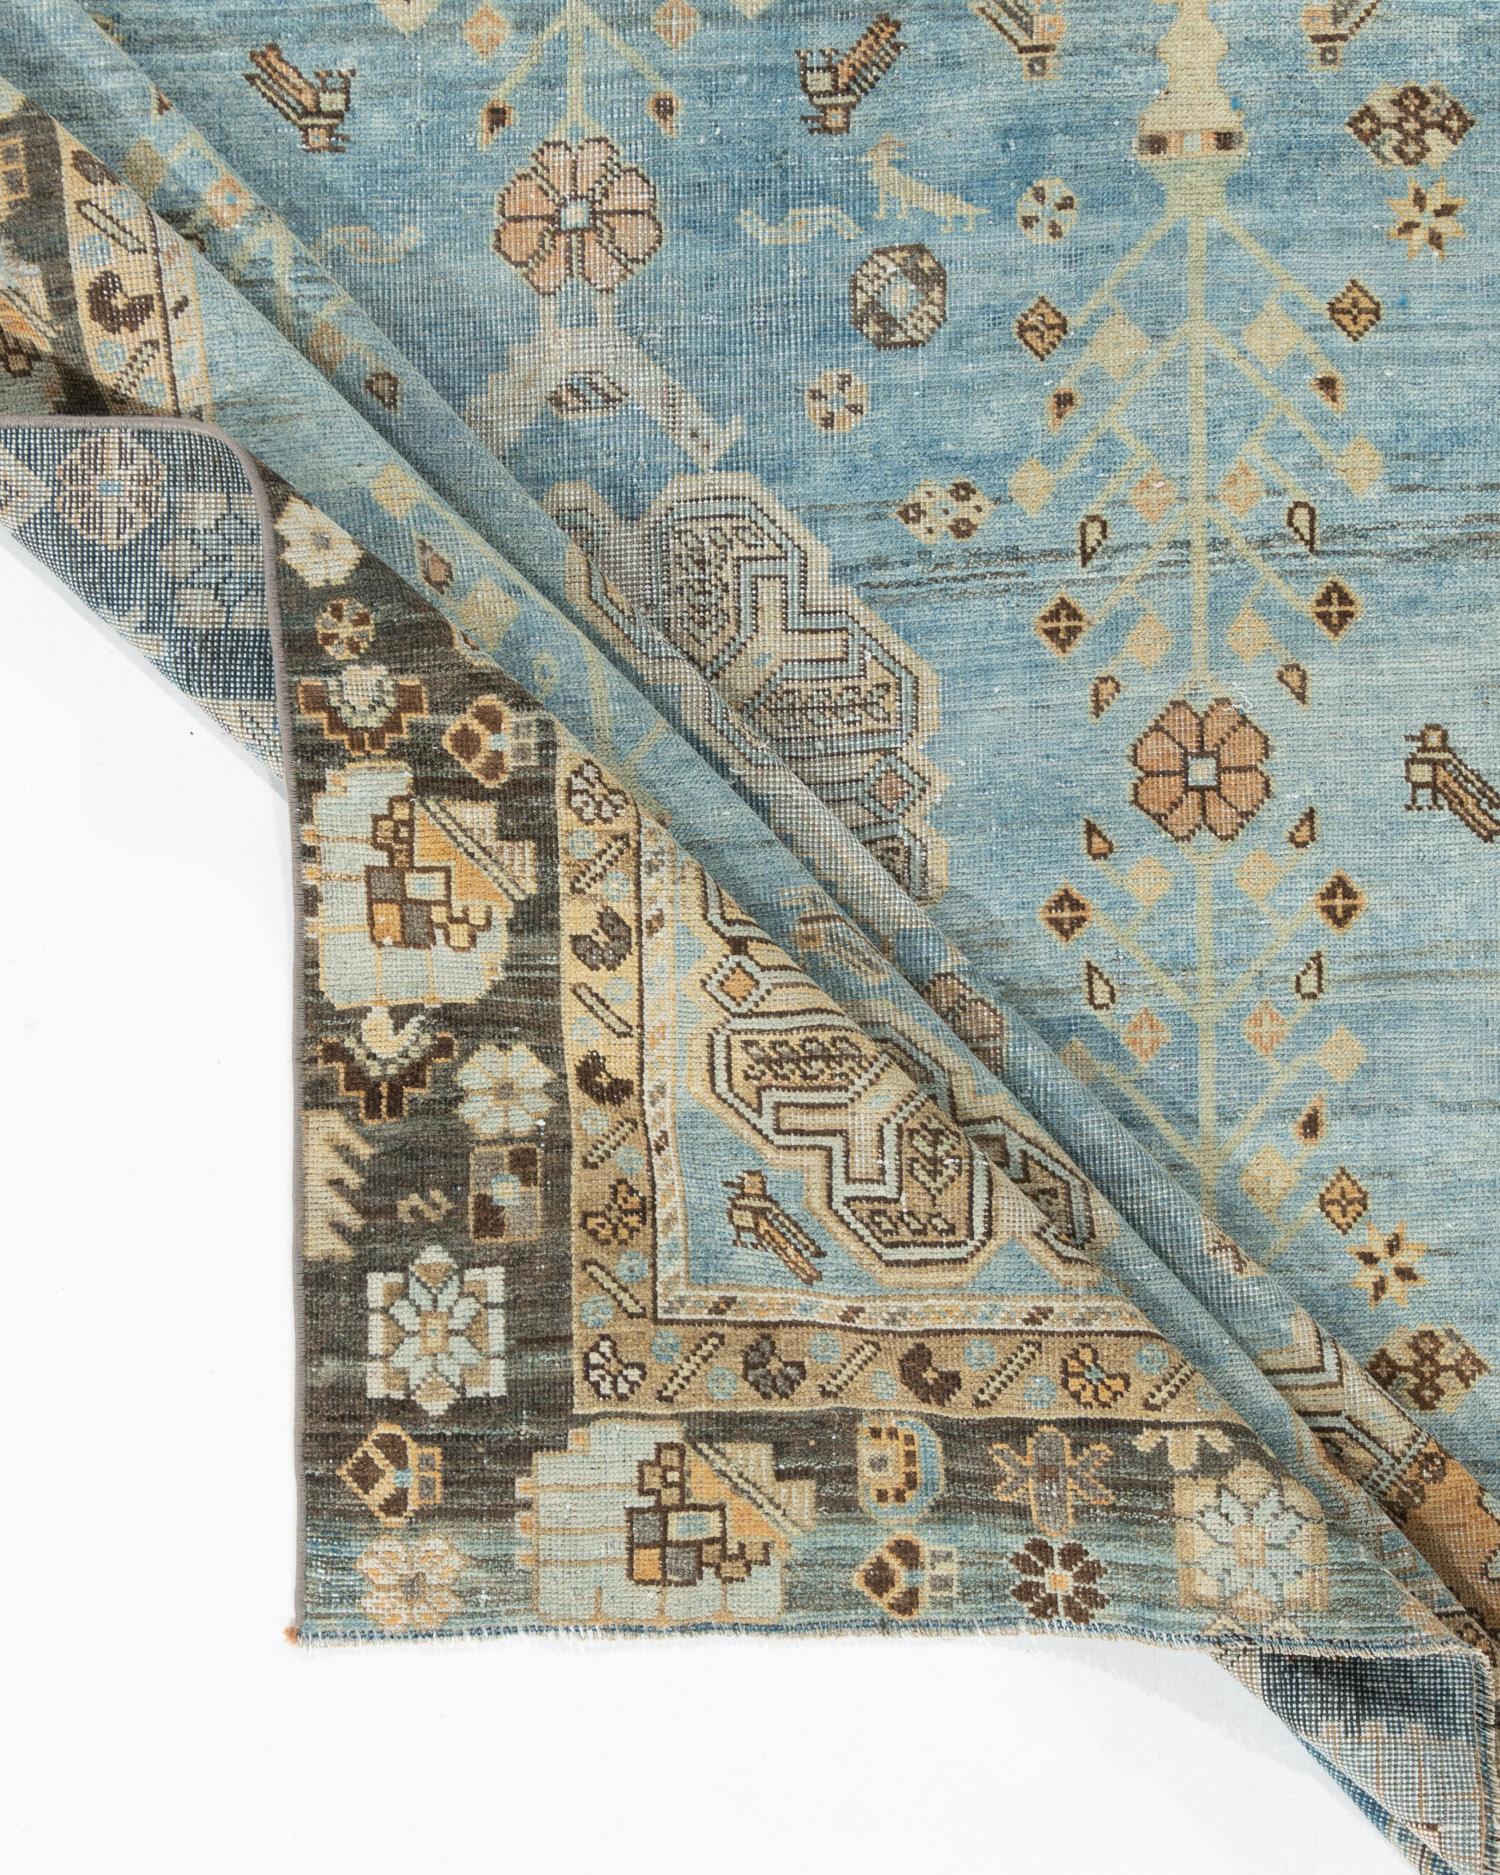 Vintage pale blue Turkish Sivas area rug, measures: 4'8 X 6'. Sivas in eastern Anatolia is best known for interpretations in light tones of Persian, especially Tabriz, designs. They are decorative in the best sense but are actually quite hard to